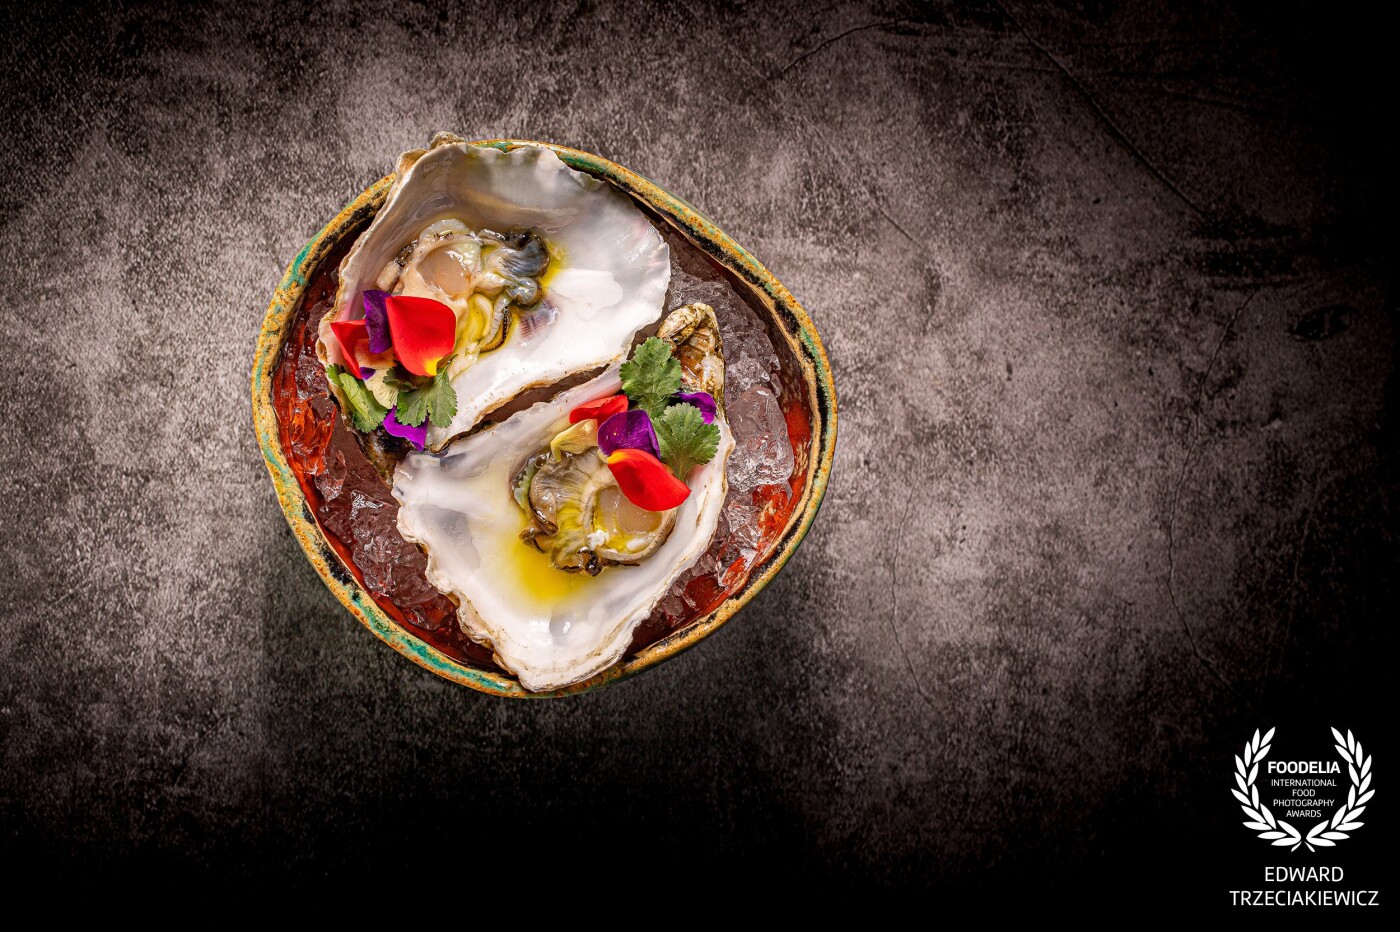 They are Irish Premier Oysters. High meat ratio and its sweet taste, crispy with a long aftertaste, typical from Irish oysters.<br />
We prepare these with yuzu and lime juice, herbs and flowers. Dish by Chef @rybusolsztyn / photo session in @kwasnejablko<br />
Canon 6D mark II ; CANON 100 Macro ; ISO 100 ; f 8.0 ; 1/160sec ; 2 two speedlights<br />
